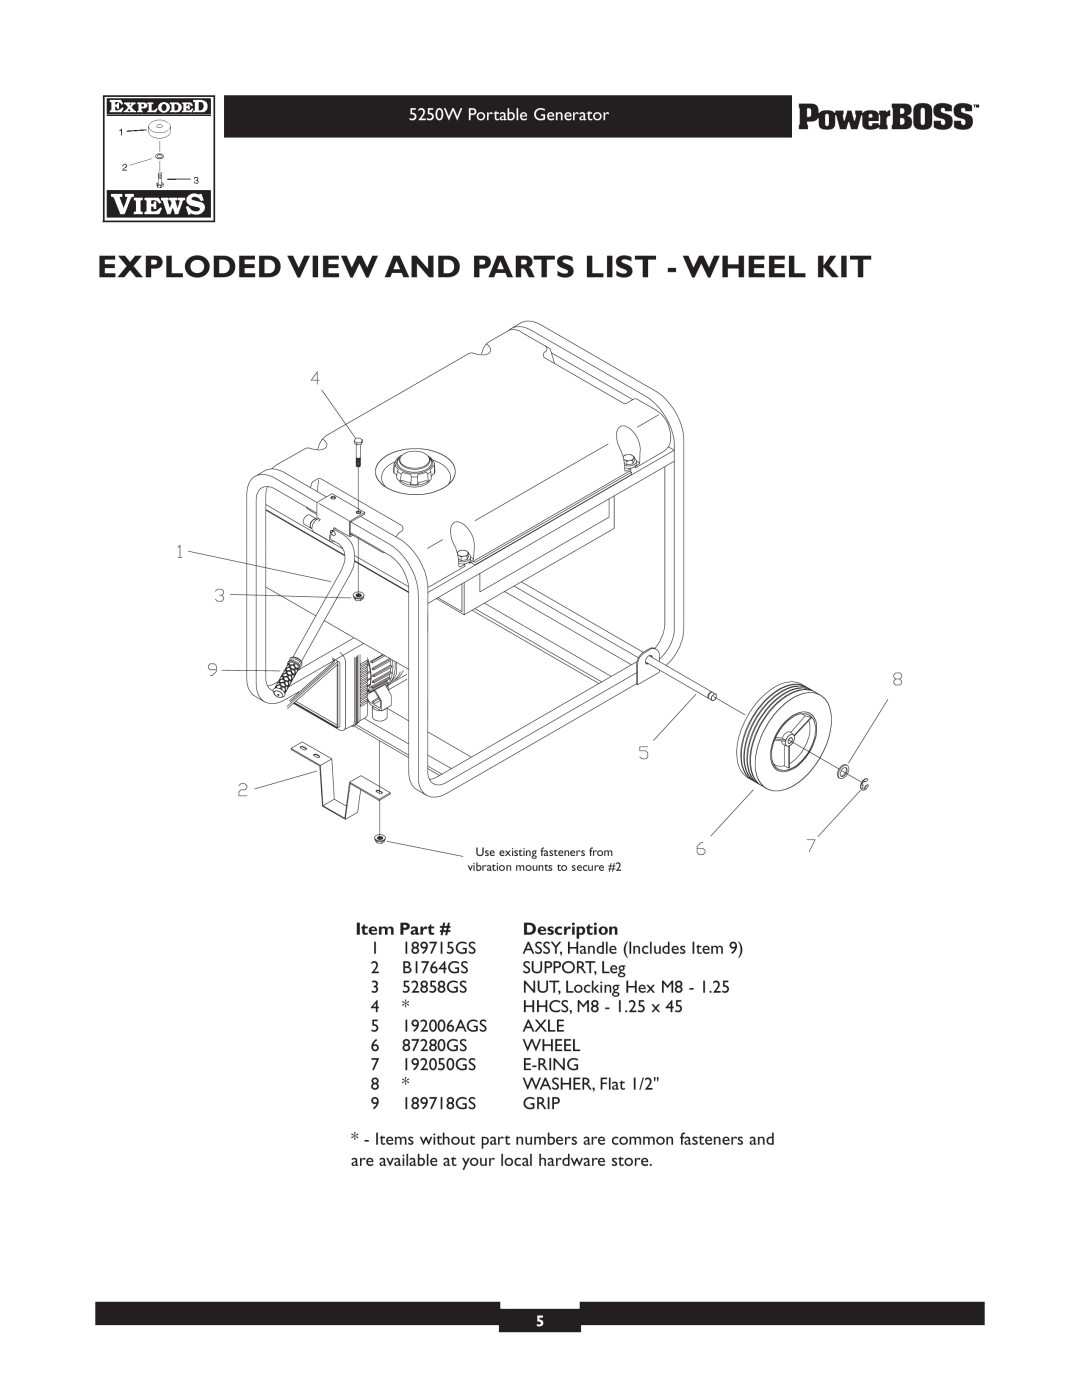 Briggs & Stratton 030217 manual Exploded View And Parts List - Wheel Kit, 5250W Portable Generator, Description 